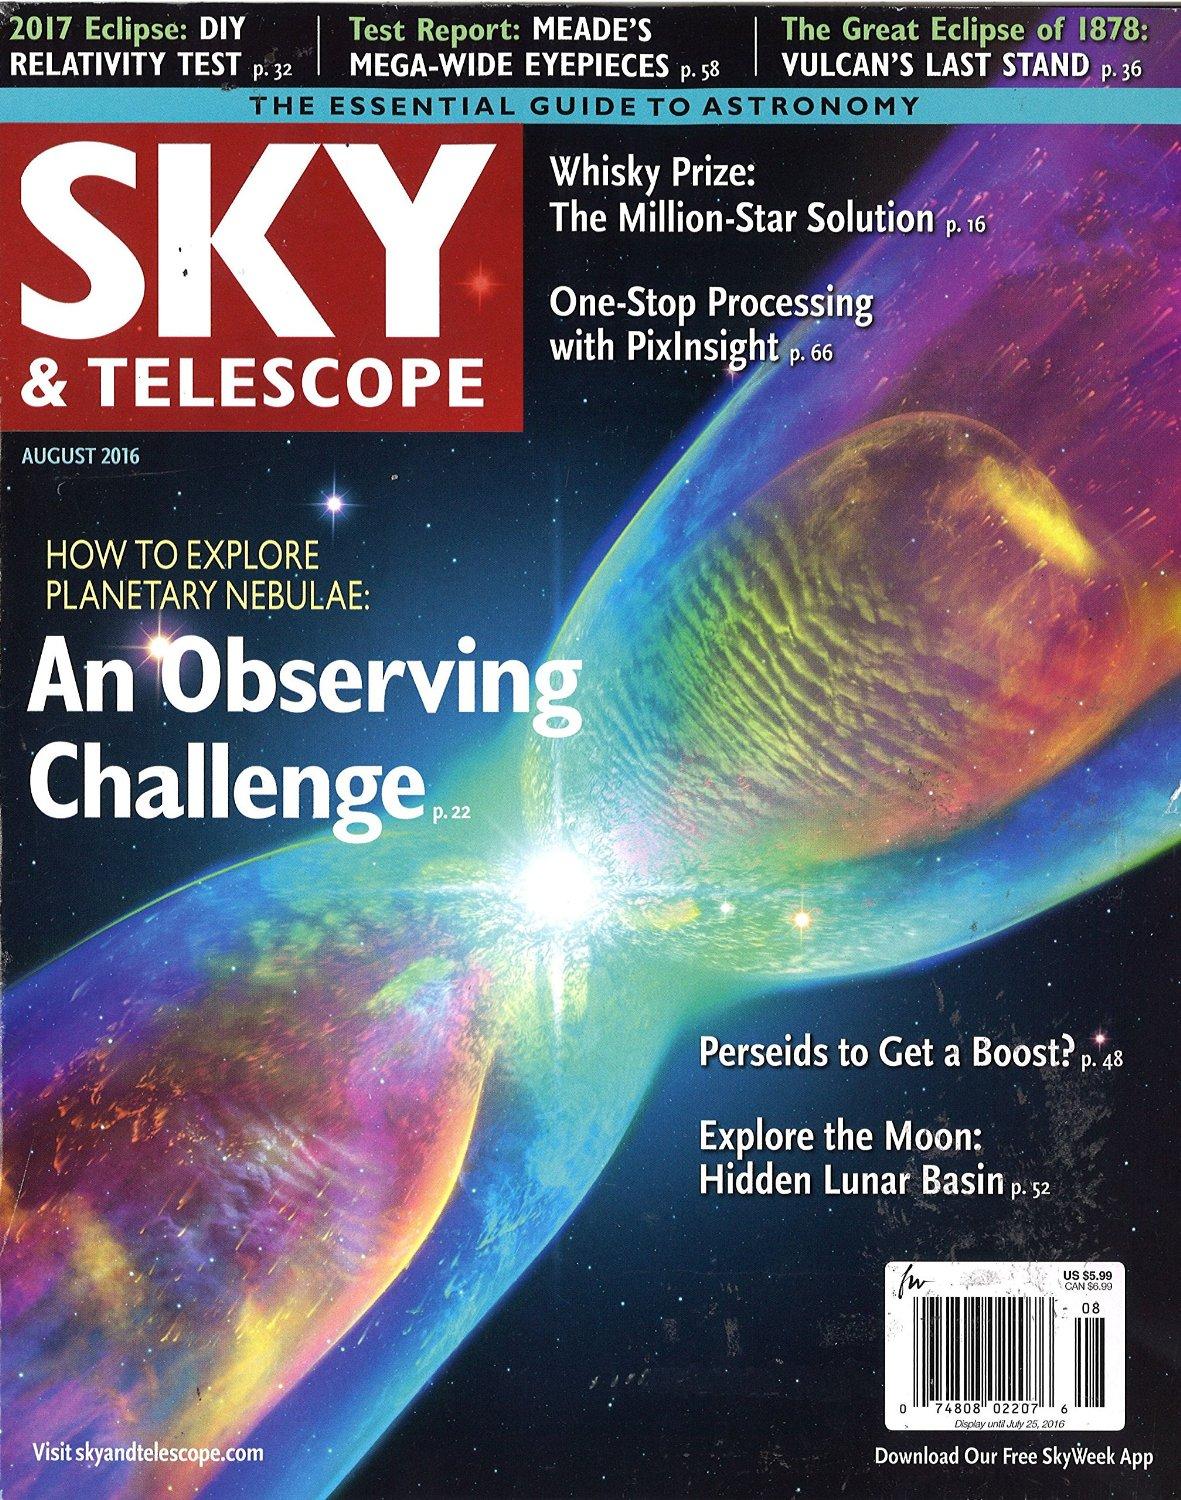 sky and telescope hot products 2015